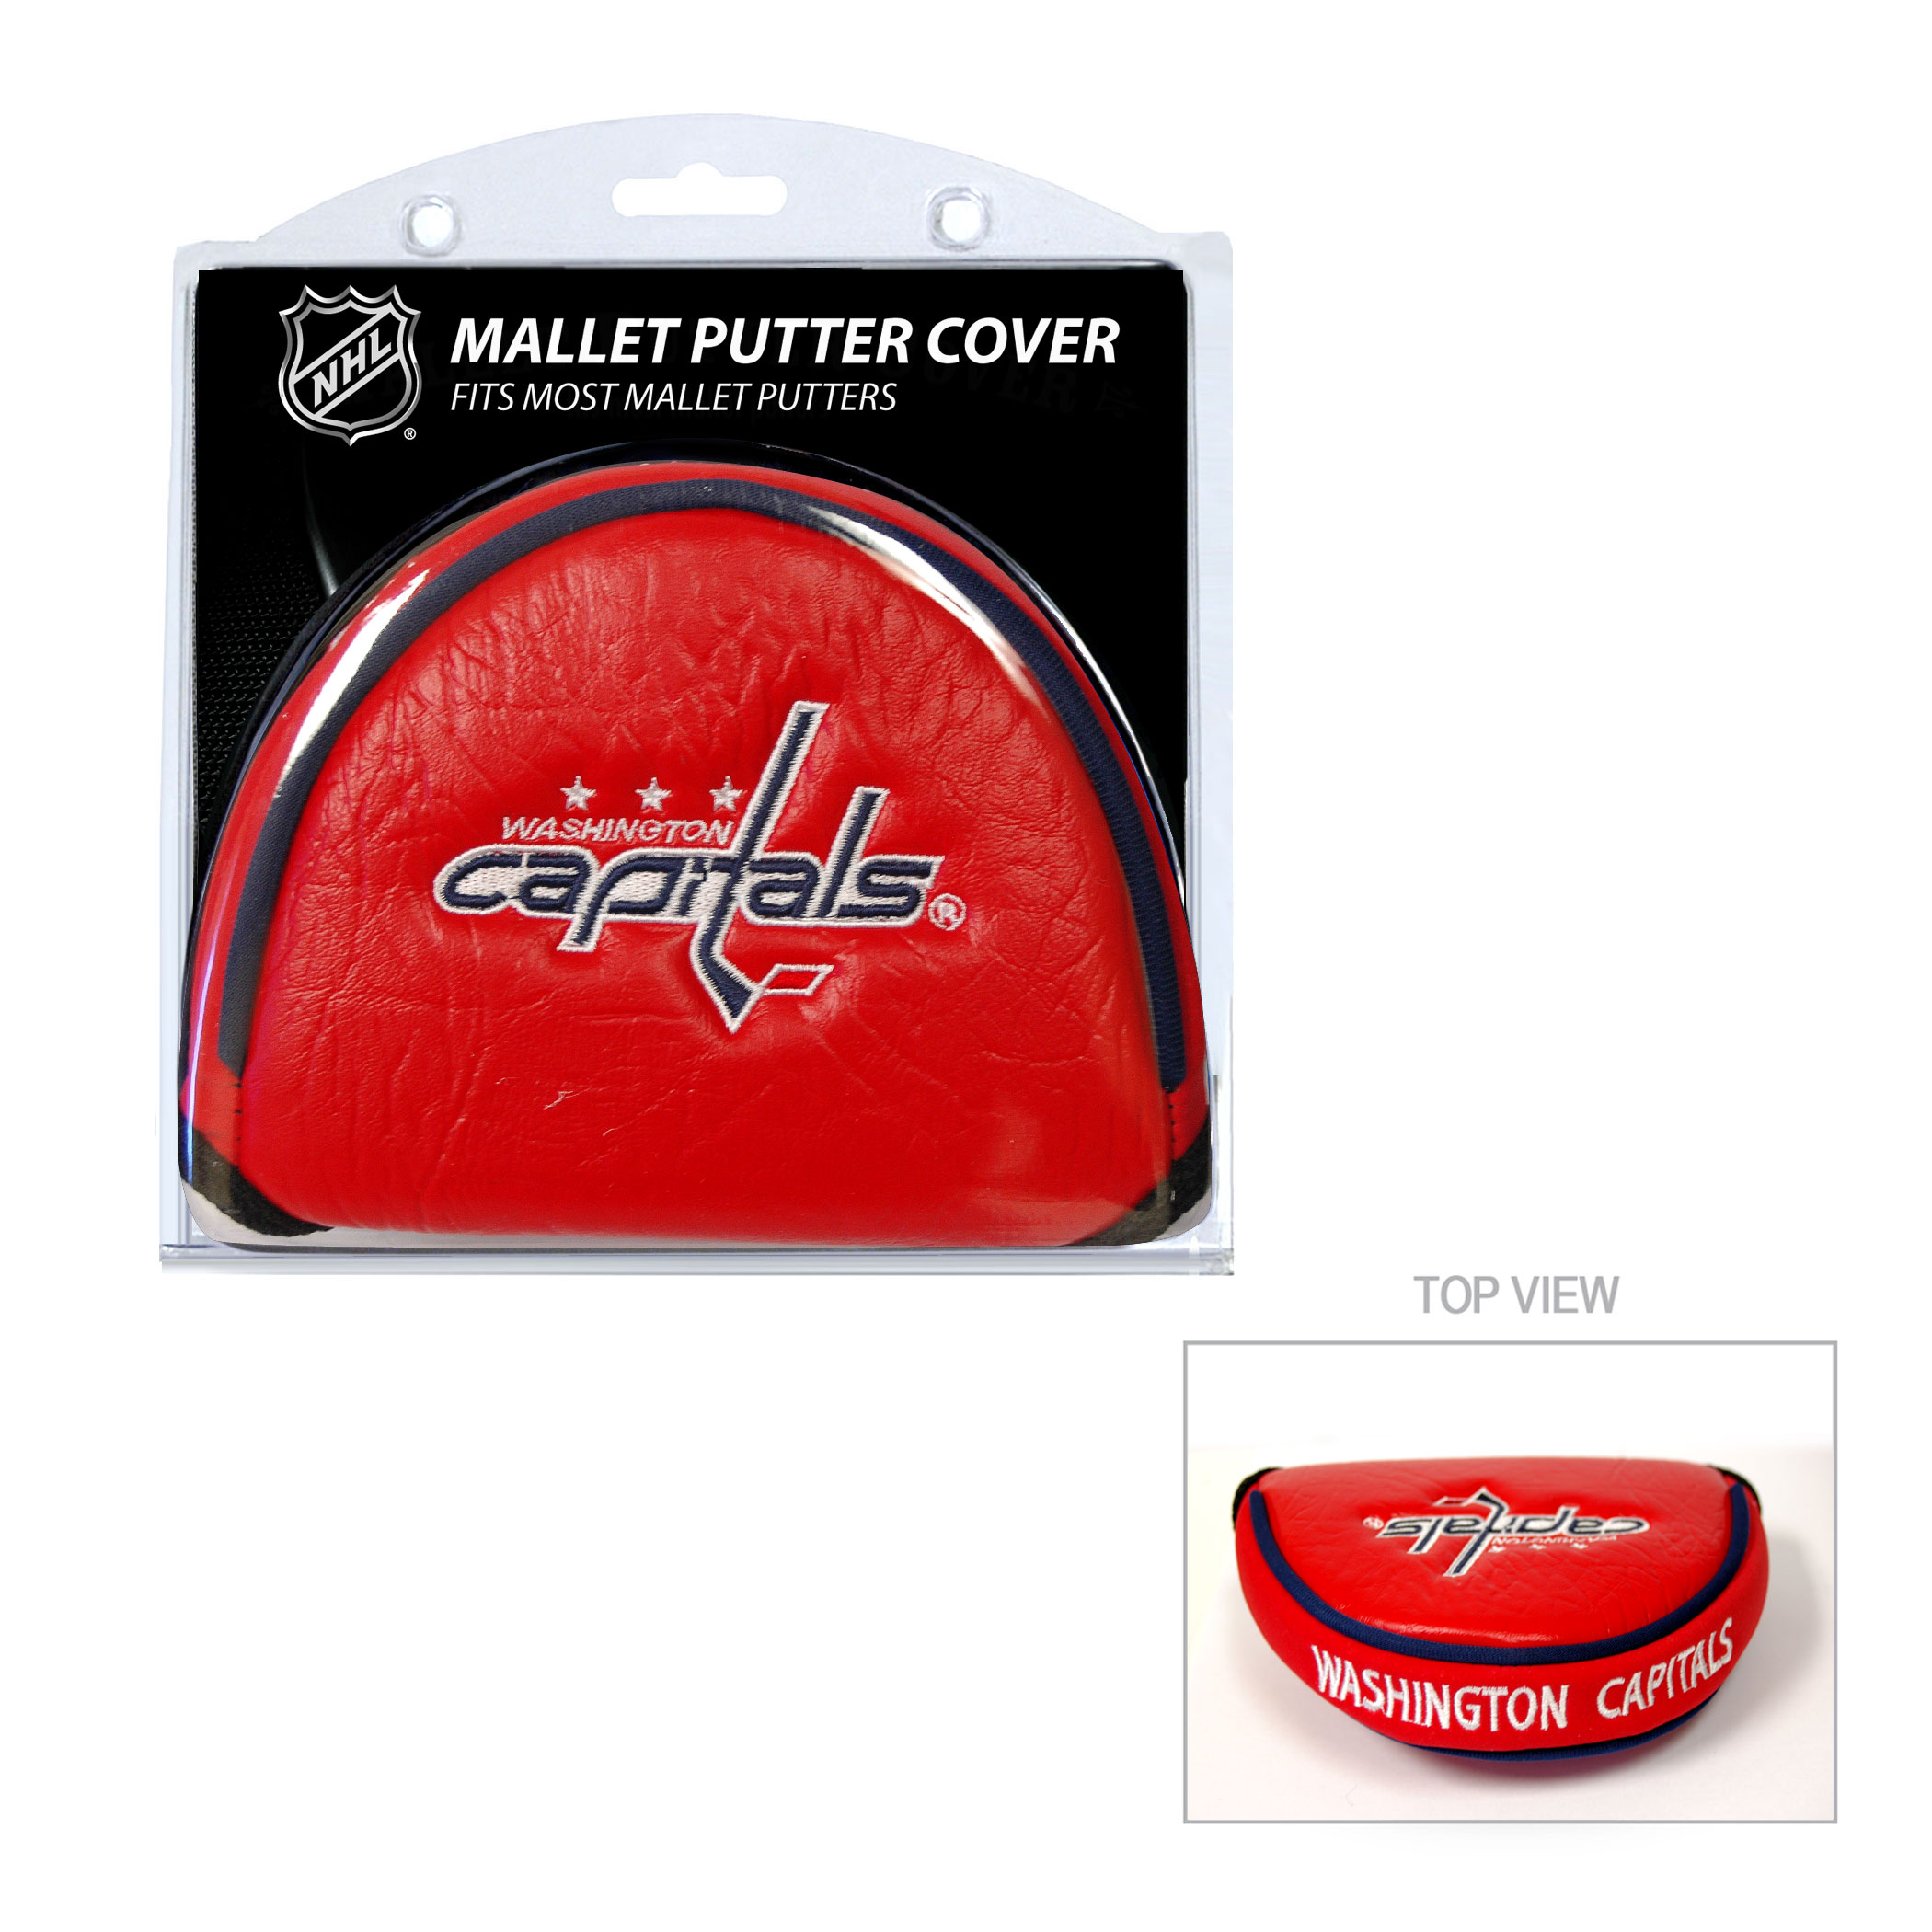 Washington Capitals Mallet Putter Cover